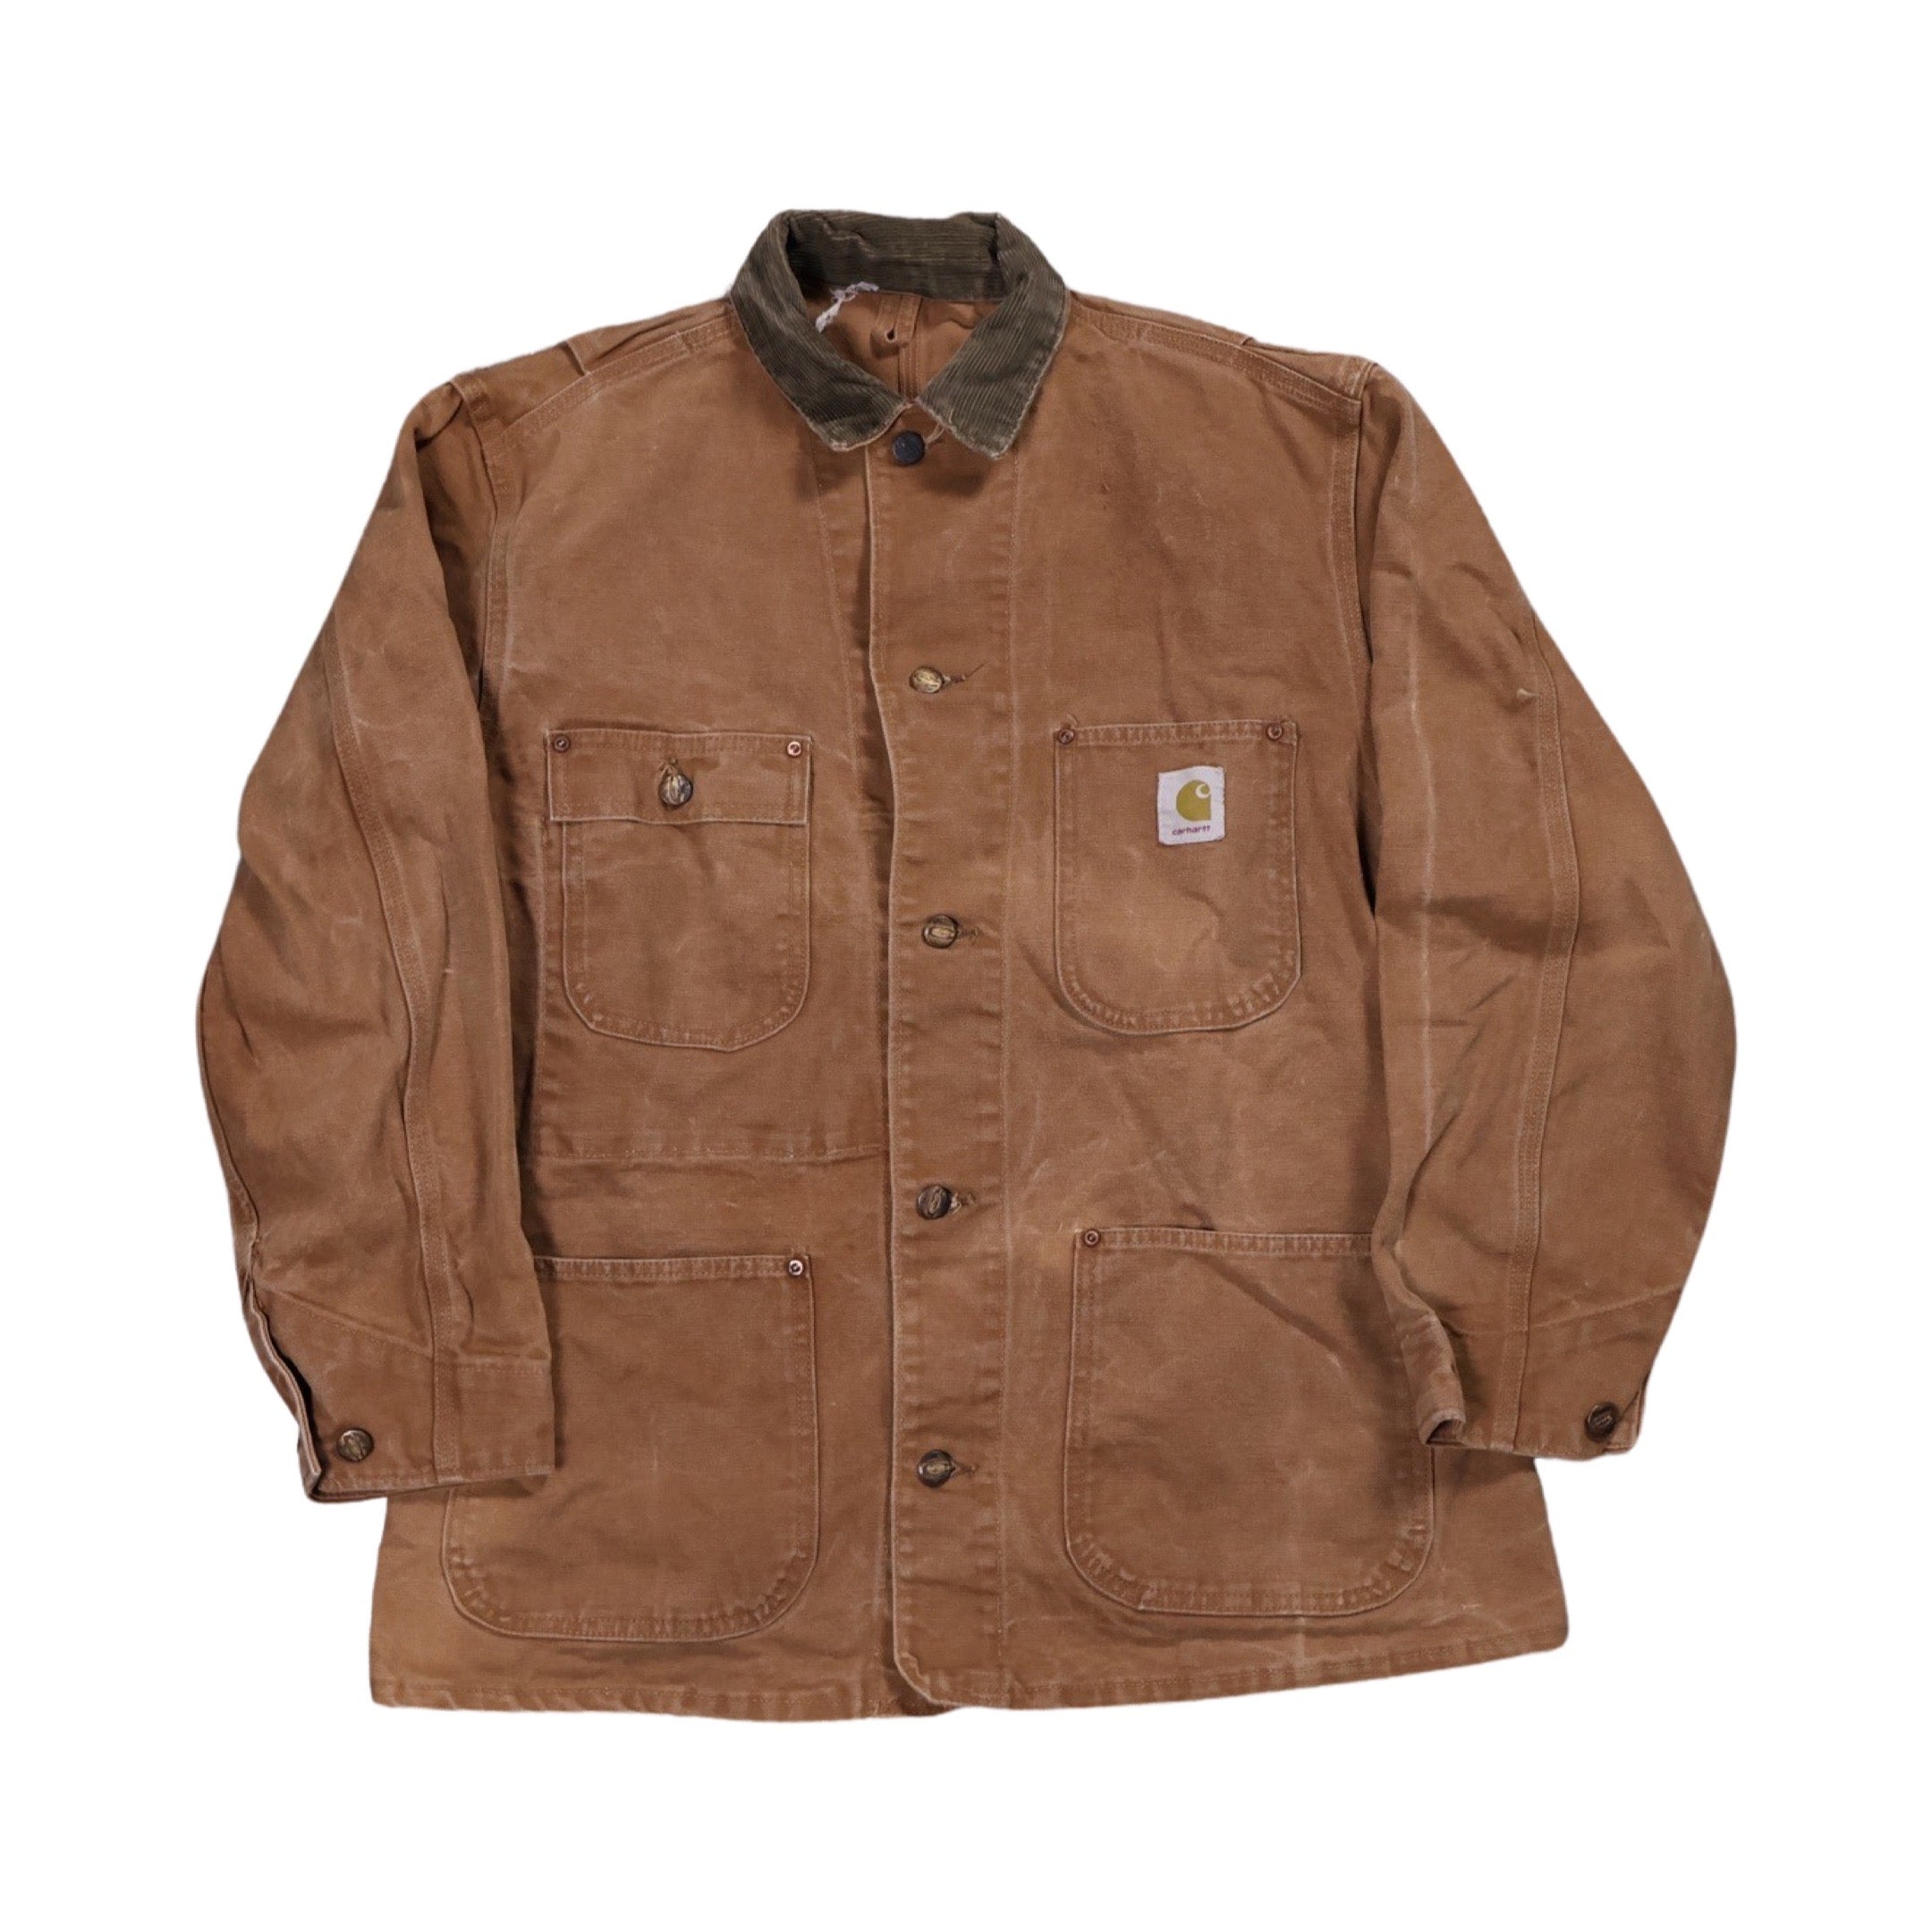 Brown Carhartt 80s/90s Chore Jacket (Large)